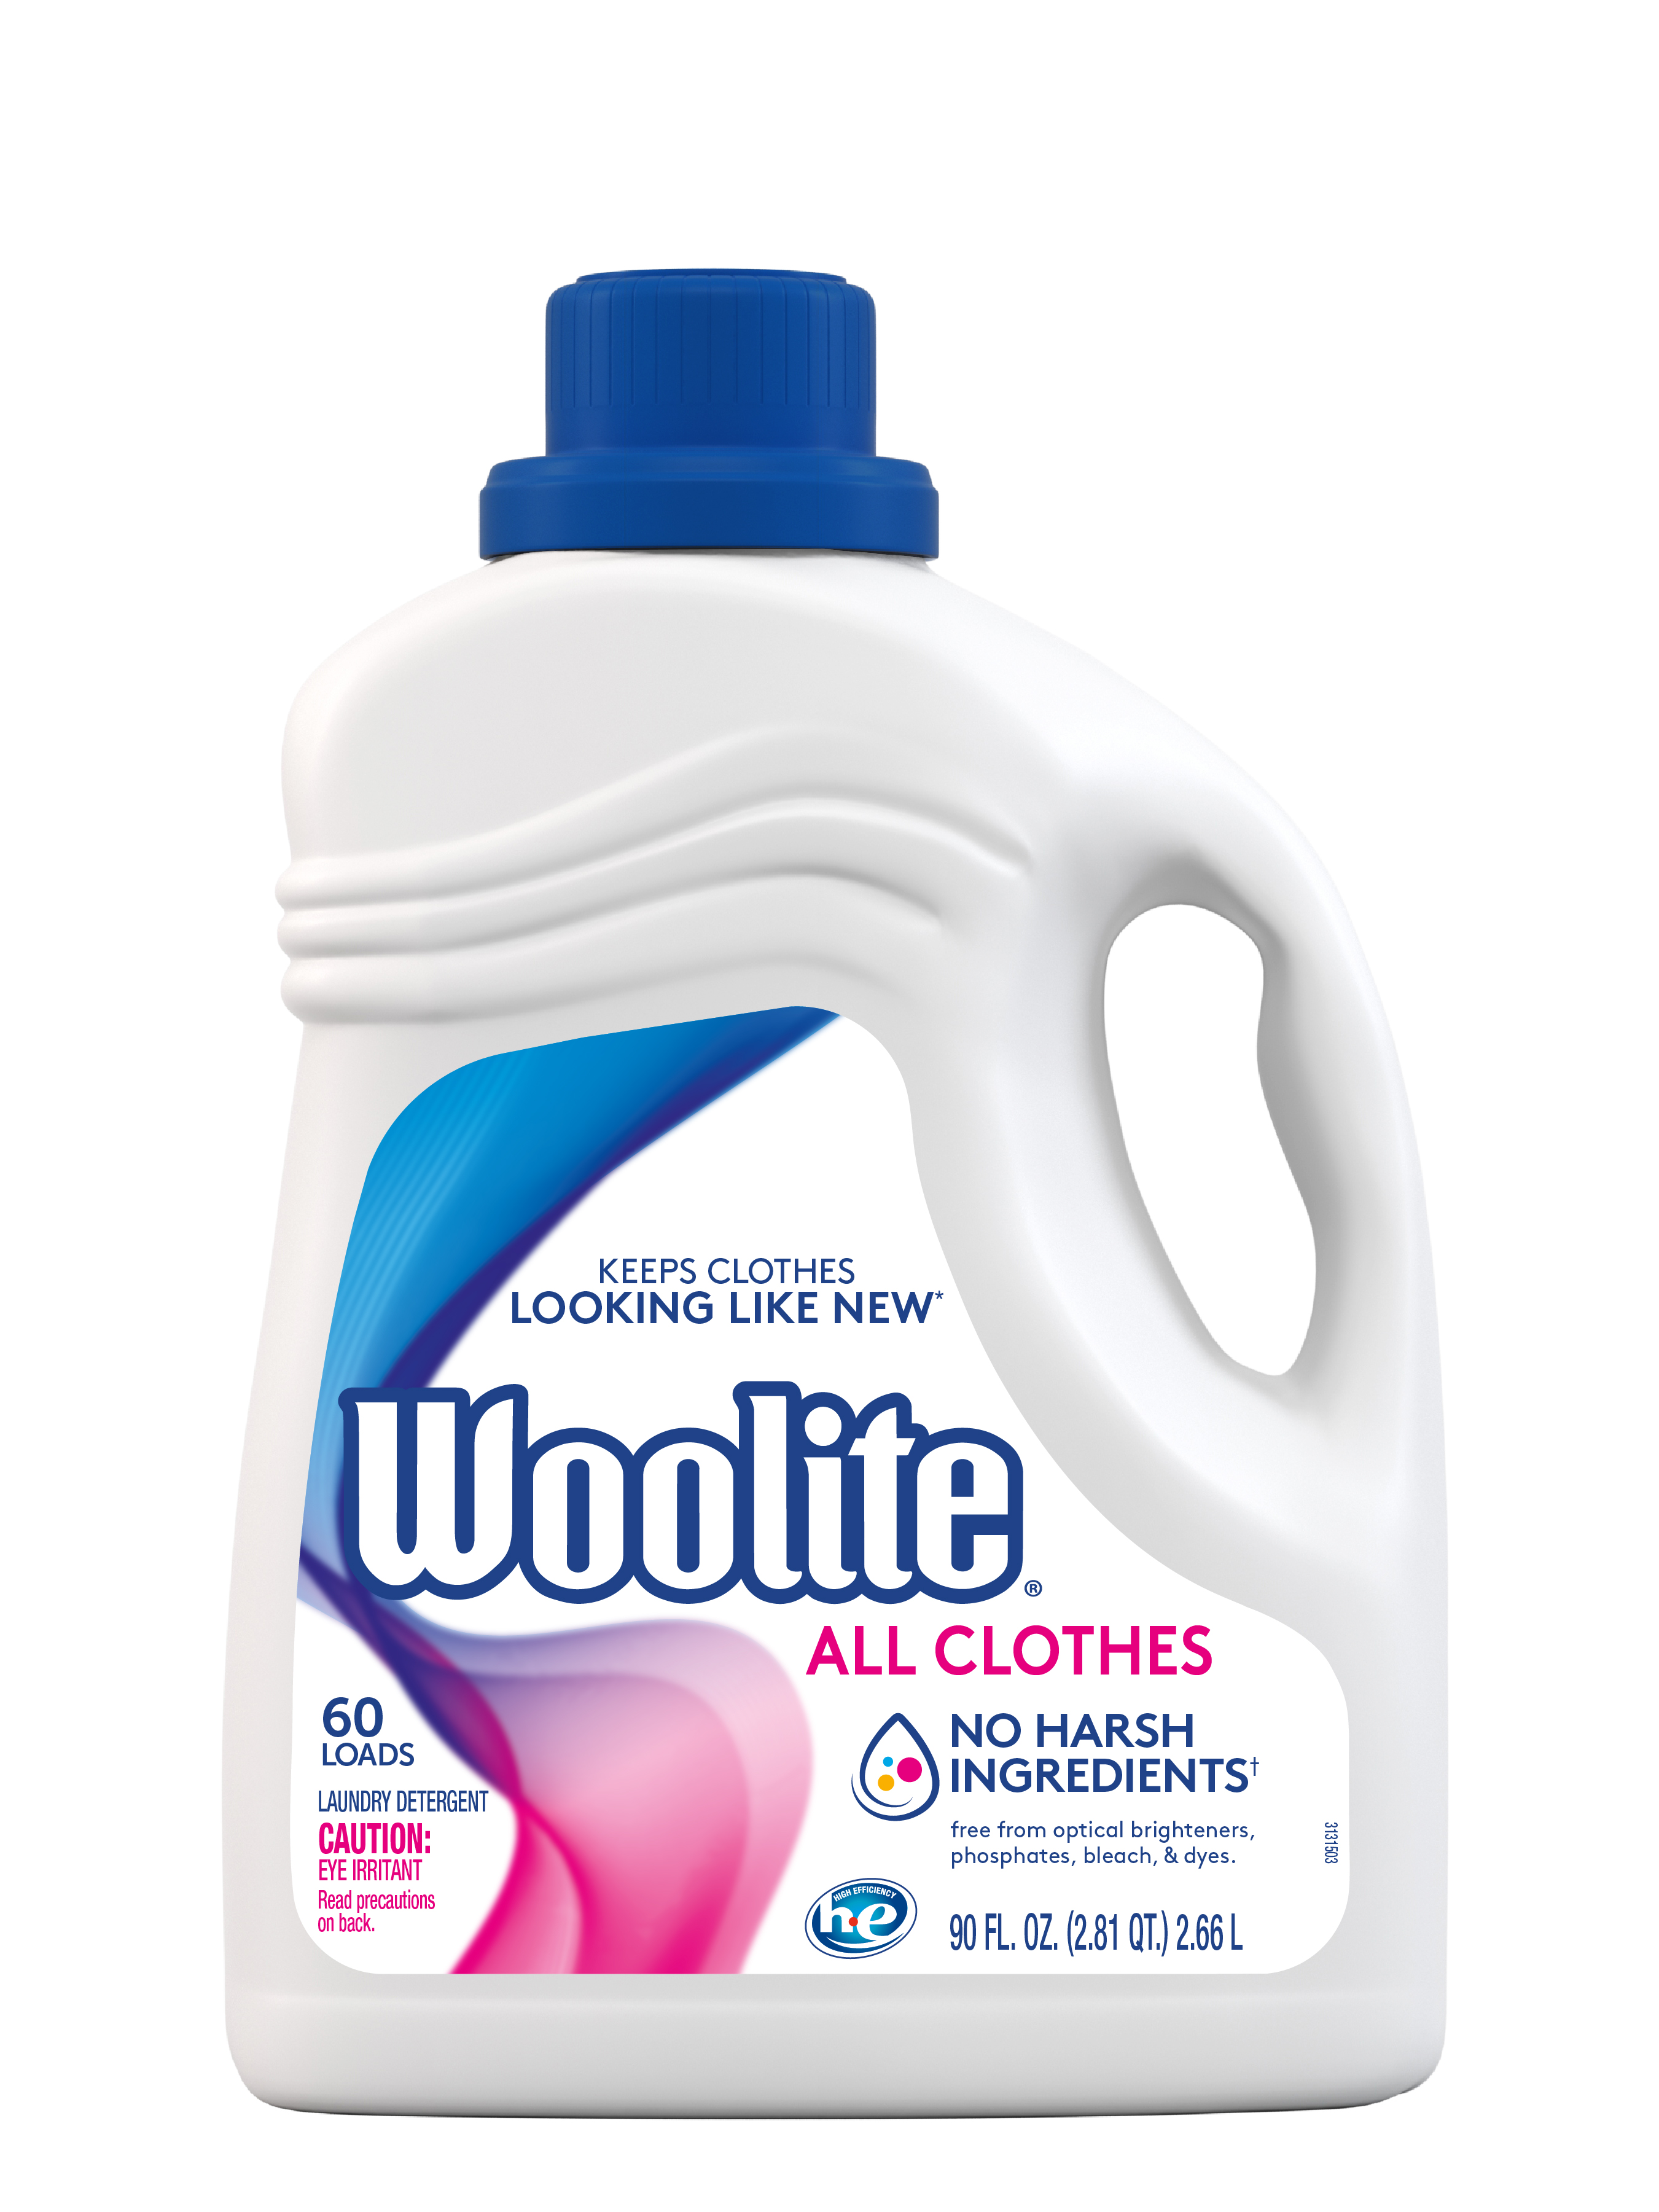 WOOLITE All Clothes Laundry Detergent Discontinued Jun12021